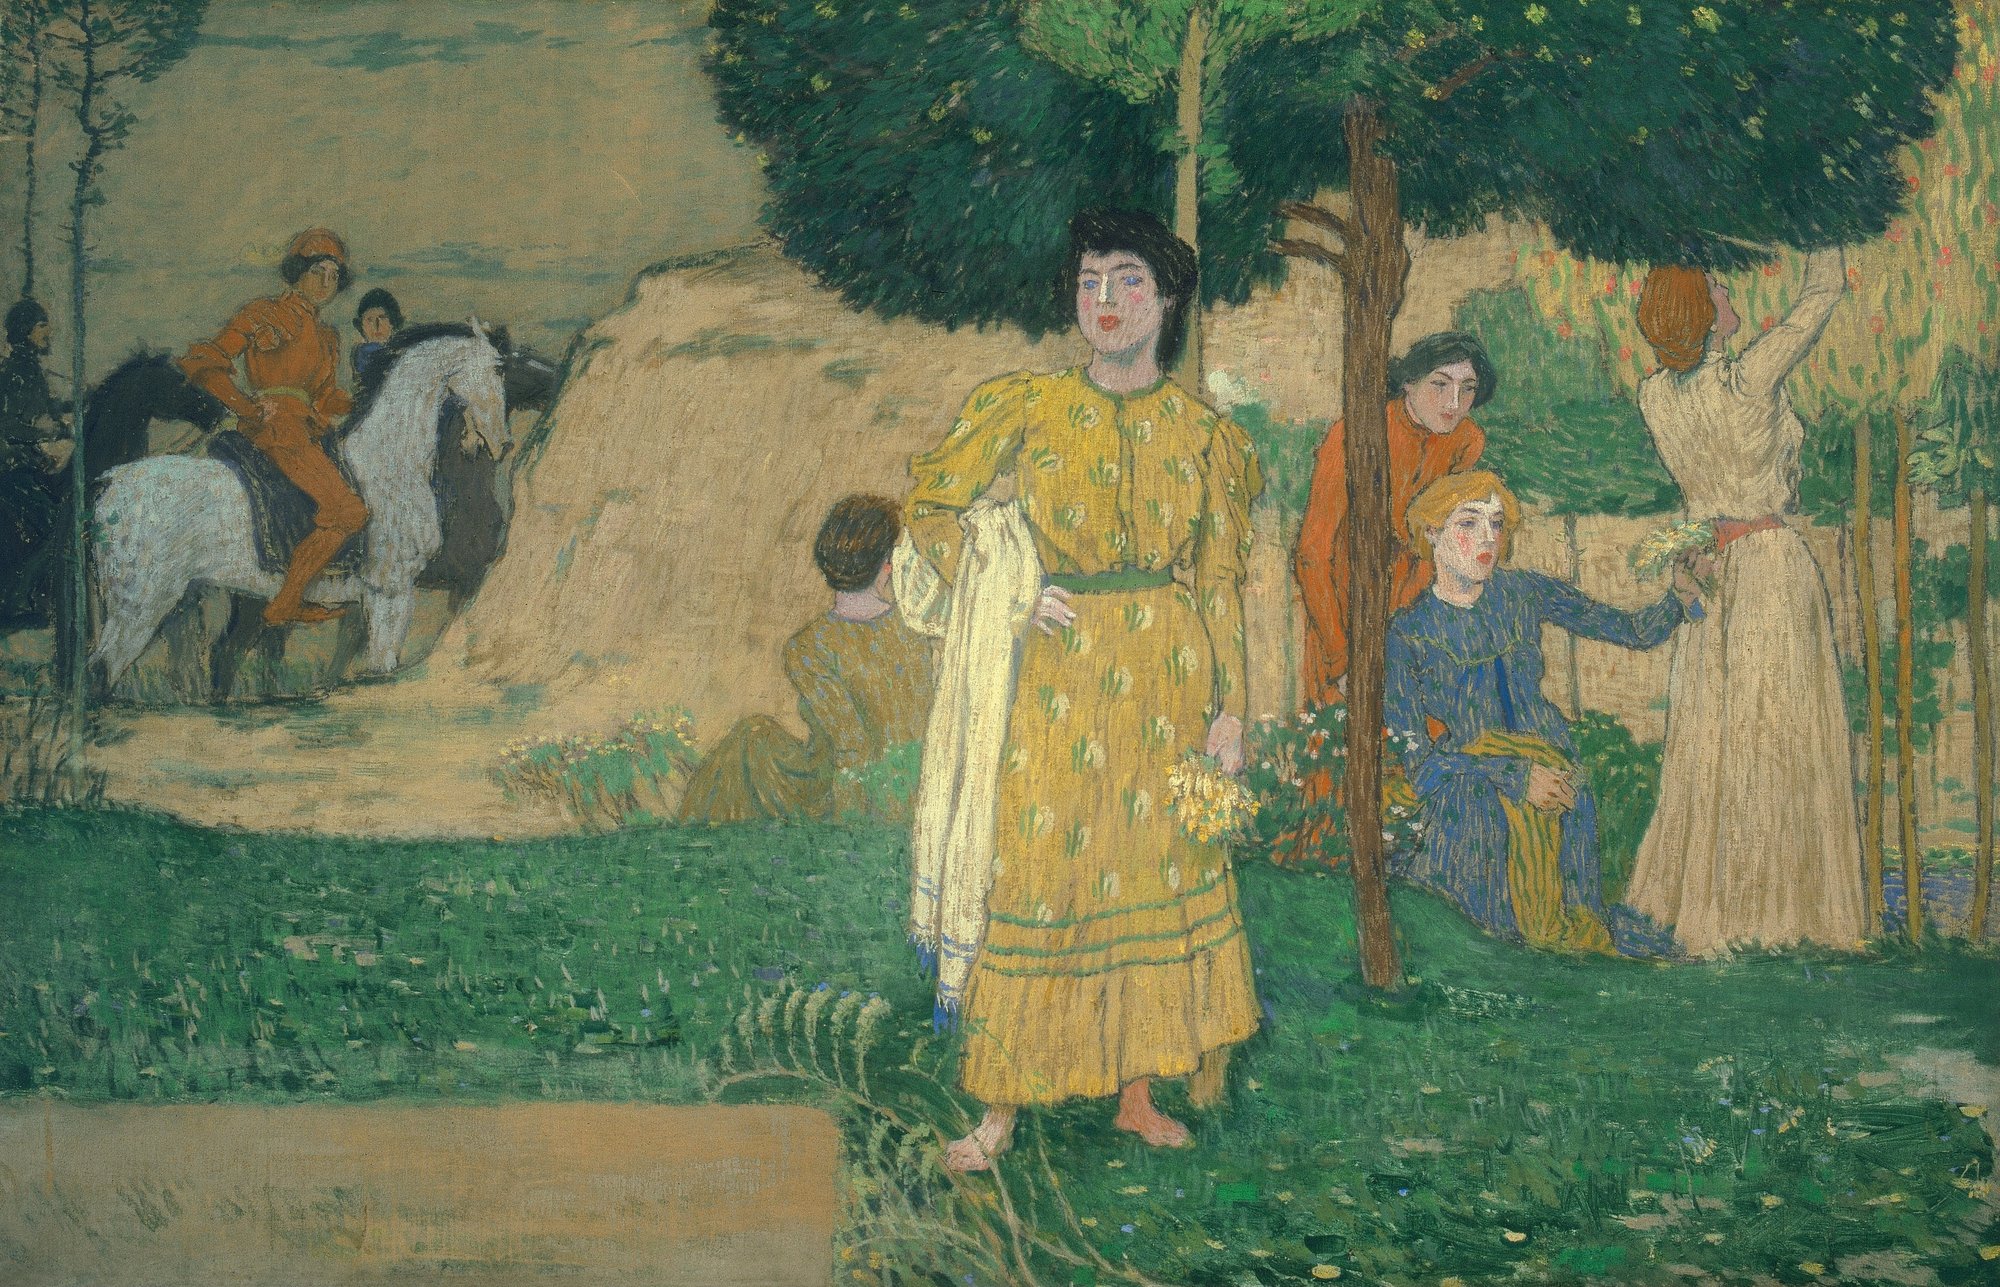 A painting of a green meadow with women gathering fruit from the trees and three male horsemen in the background.